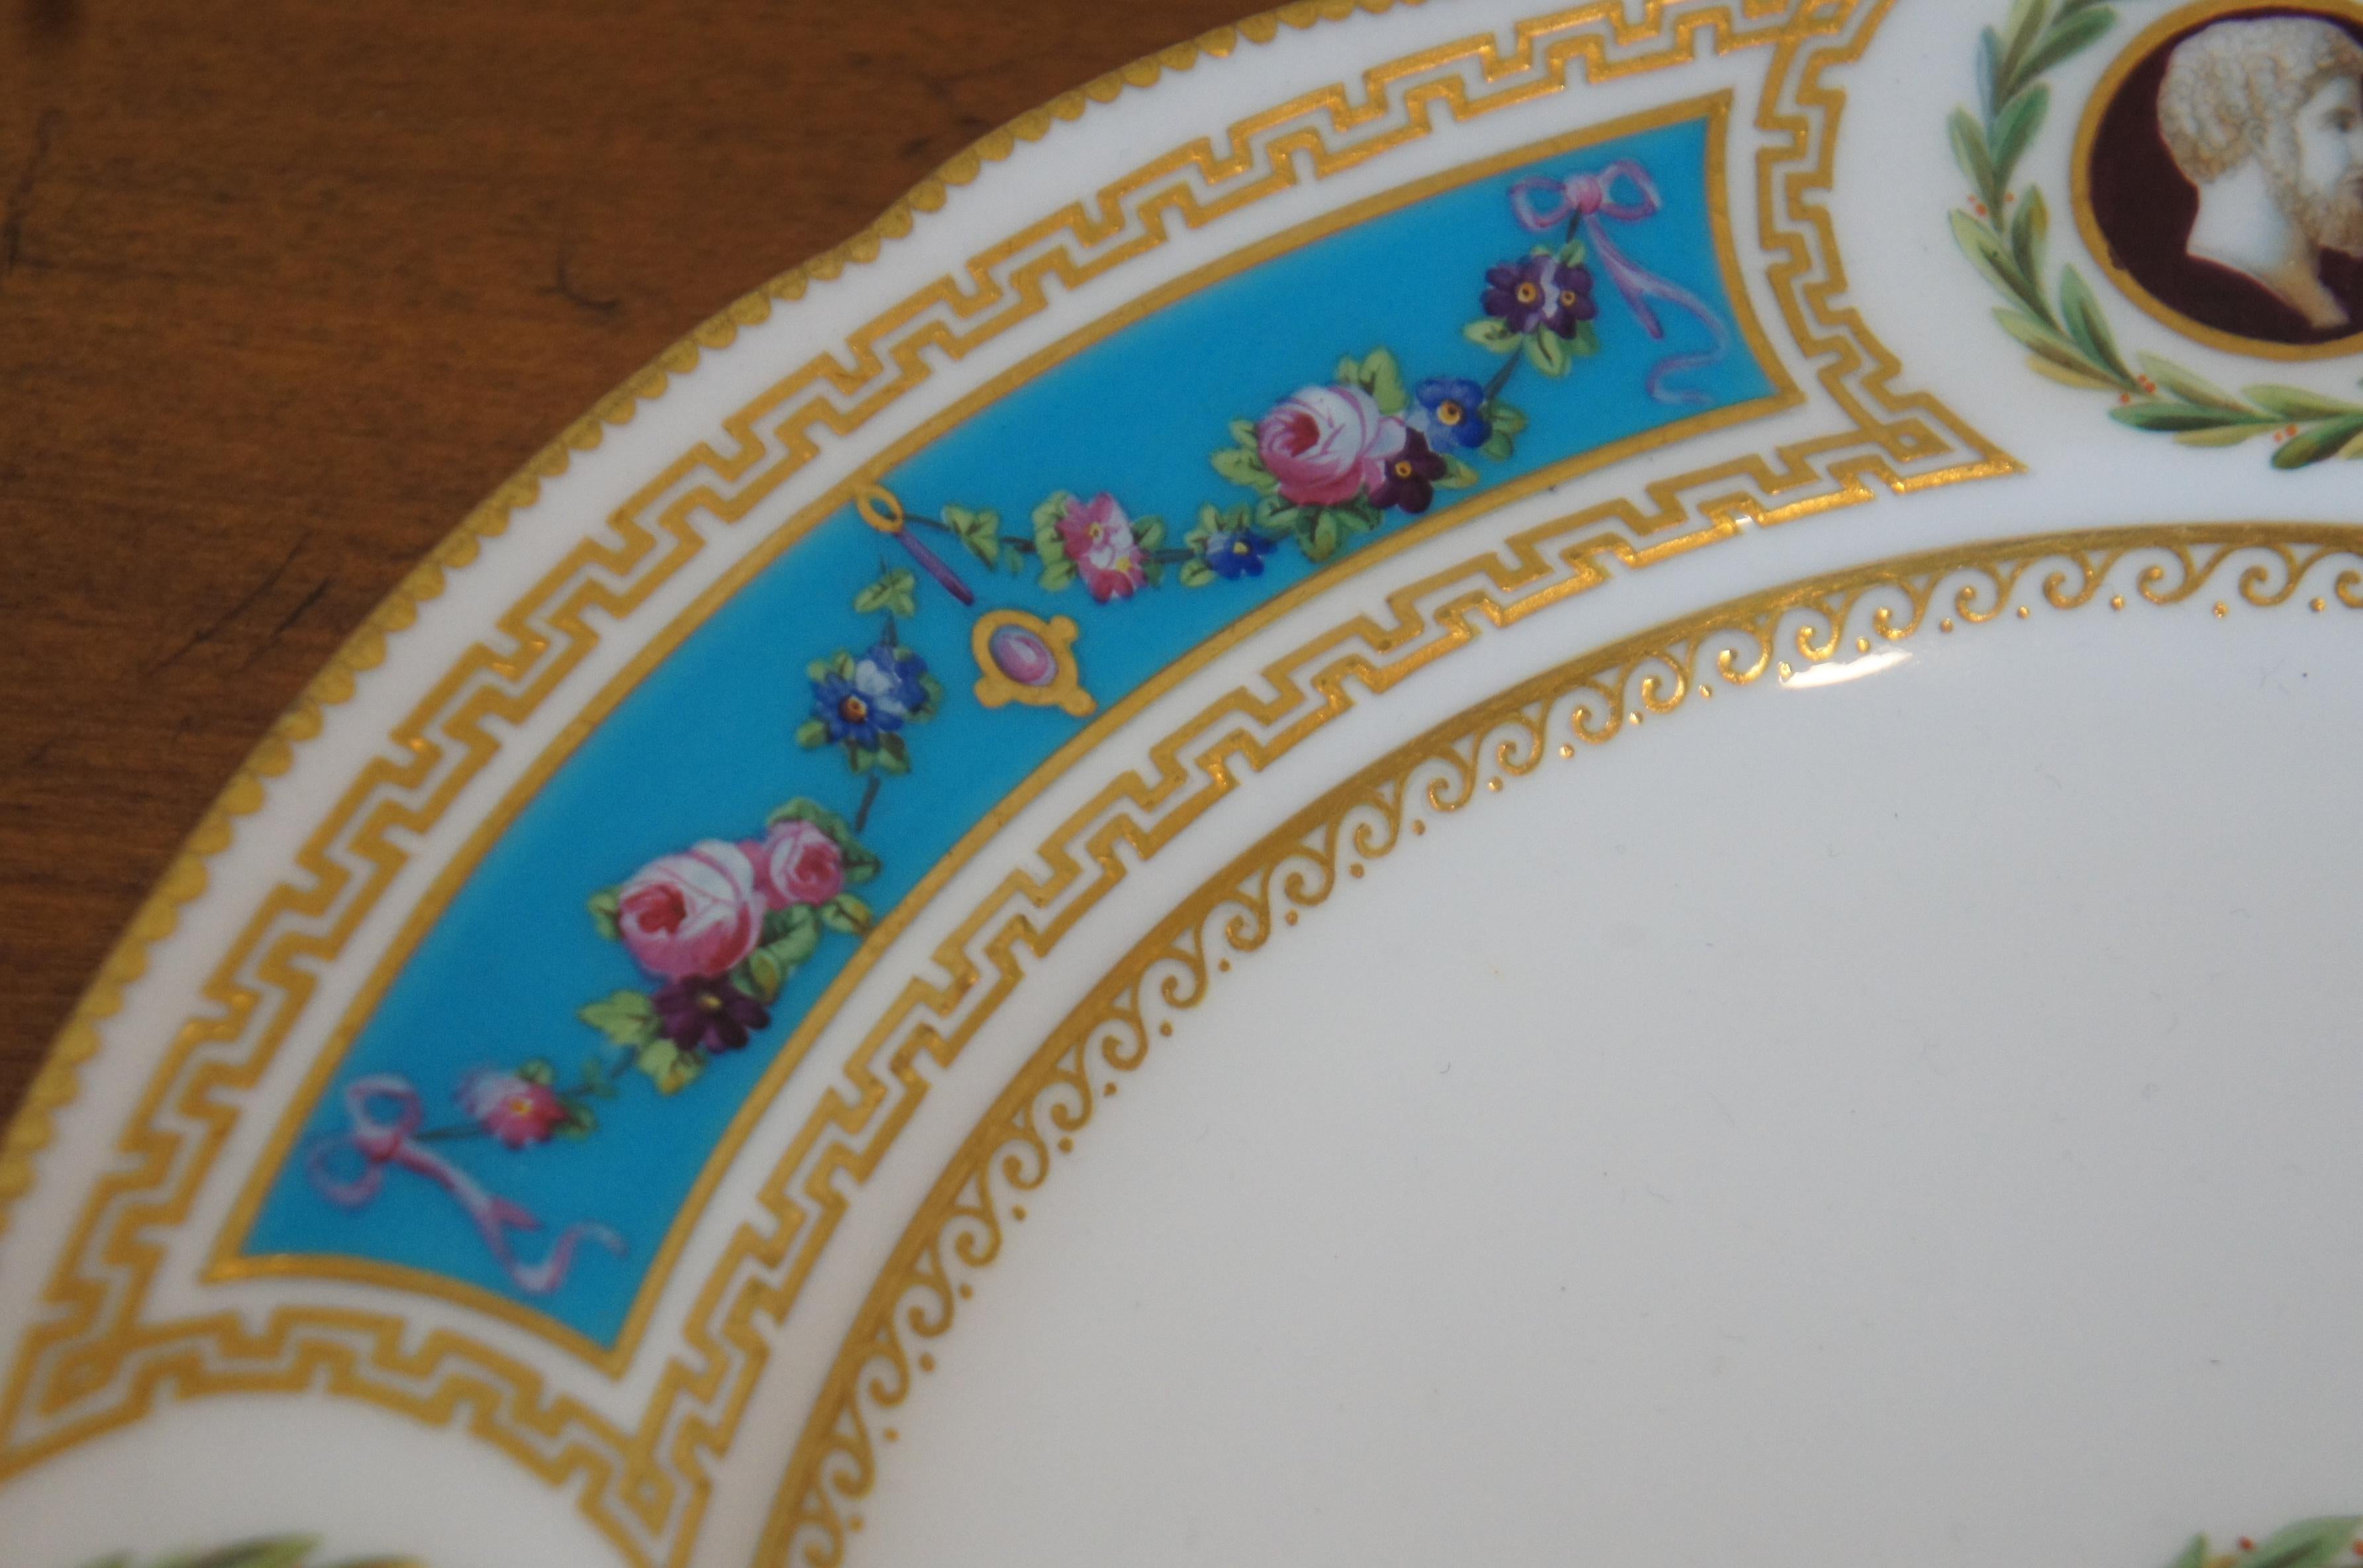 2 Antique 1862 Minton International Exhibition Jeweled Turquoise Plates For Sale 2